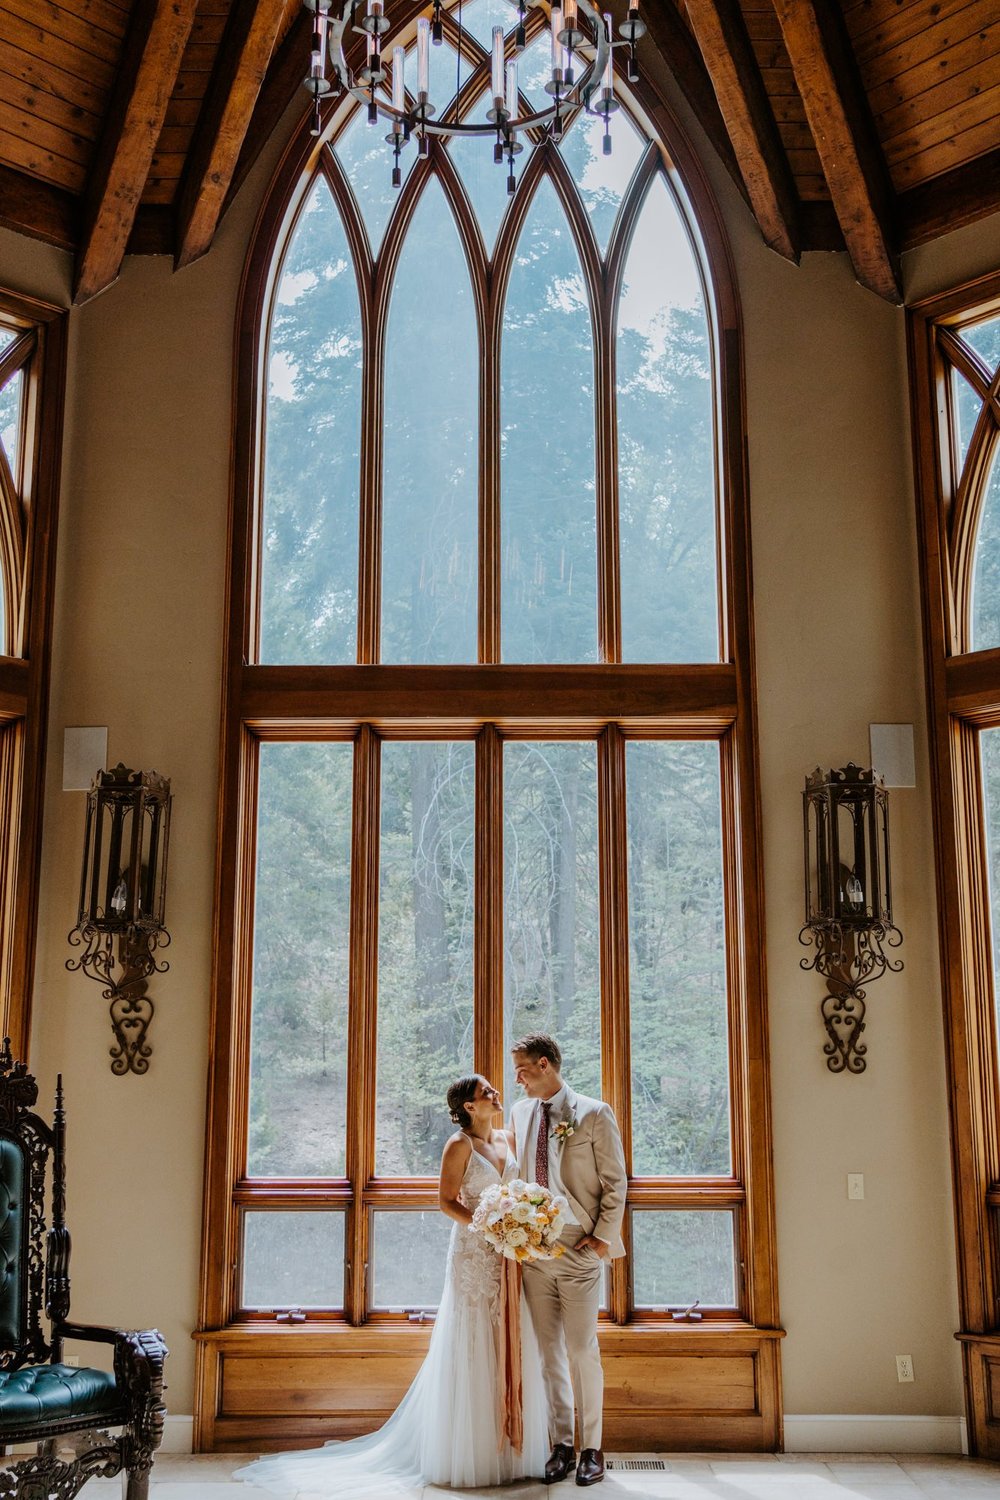 Bride and groom romantic couples photos at Castle in the Forest in lake arrowhead, airbnb wedding, Photo by Tida Svy